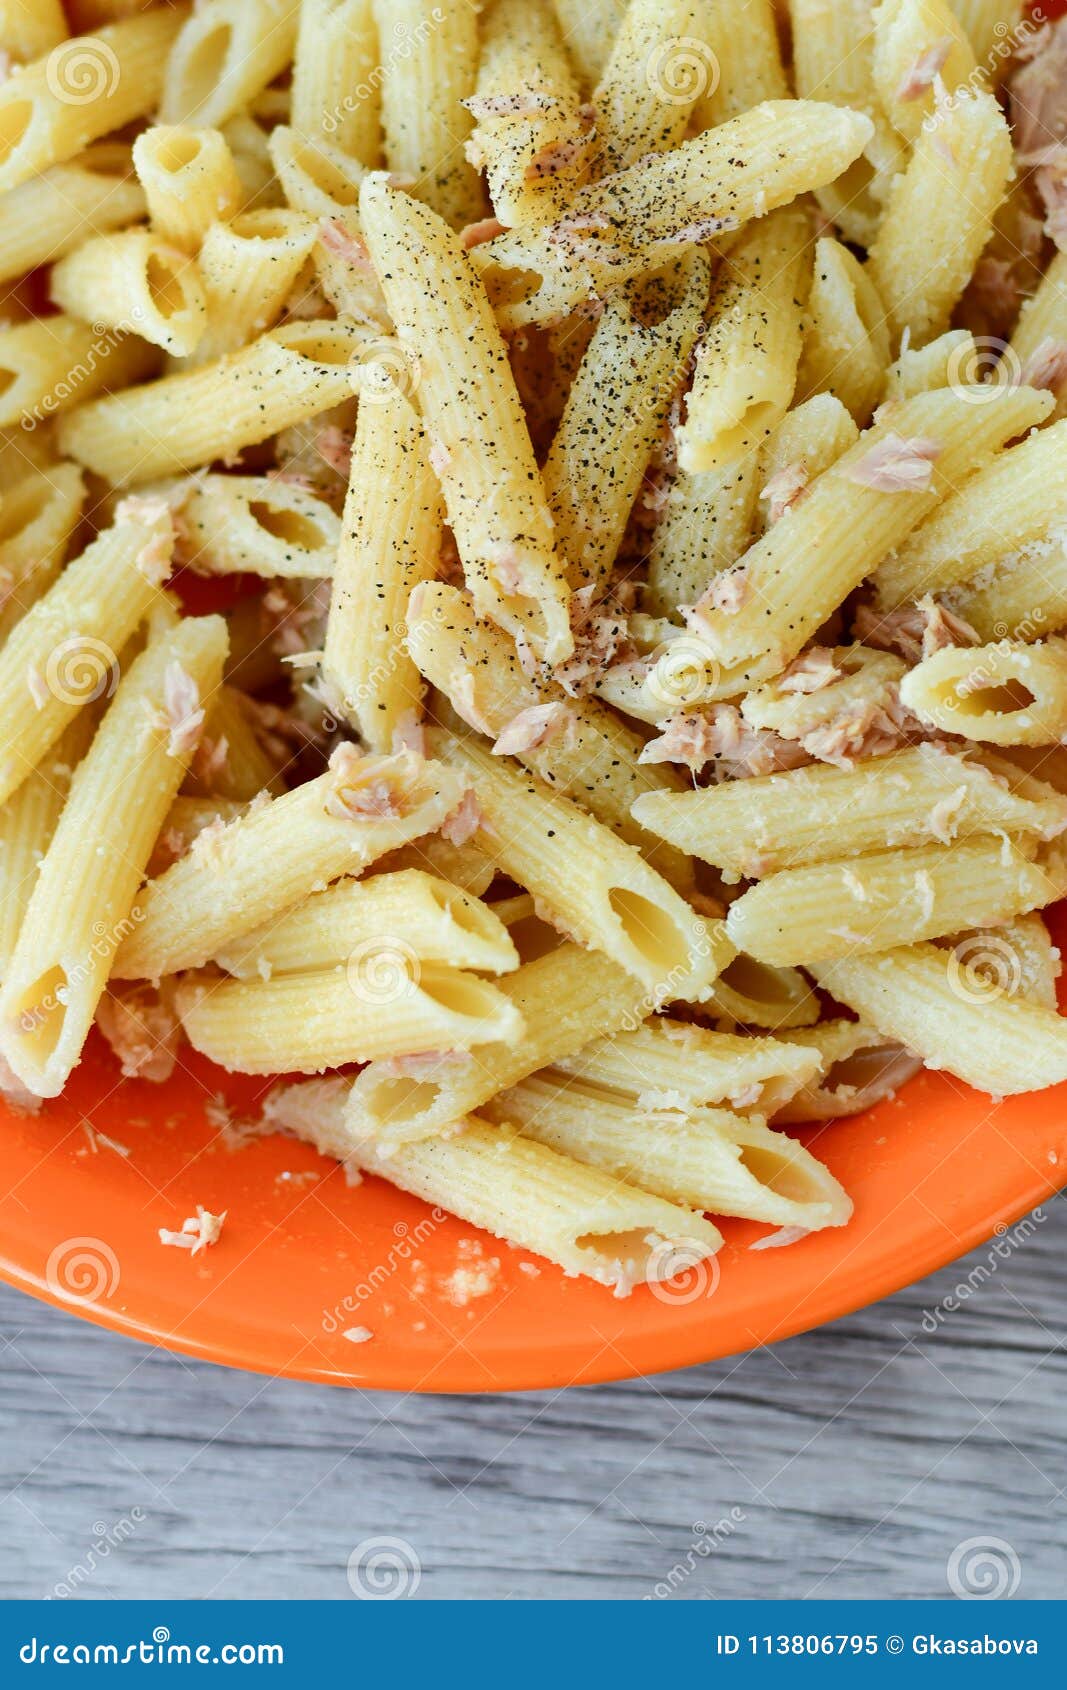 Penne with tuna fish stock image. Image of grated, basil - 113806795